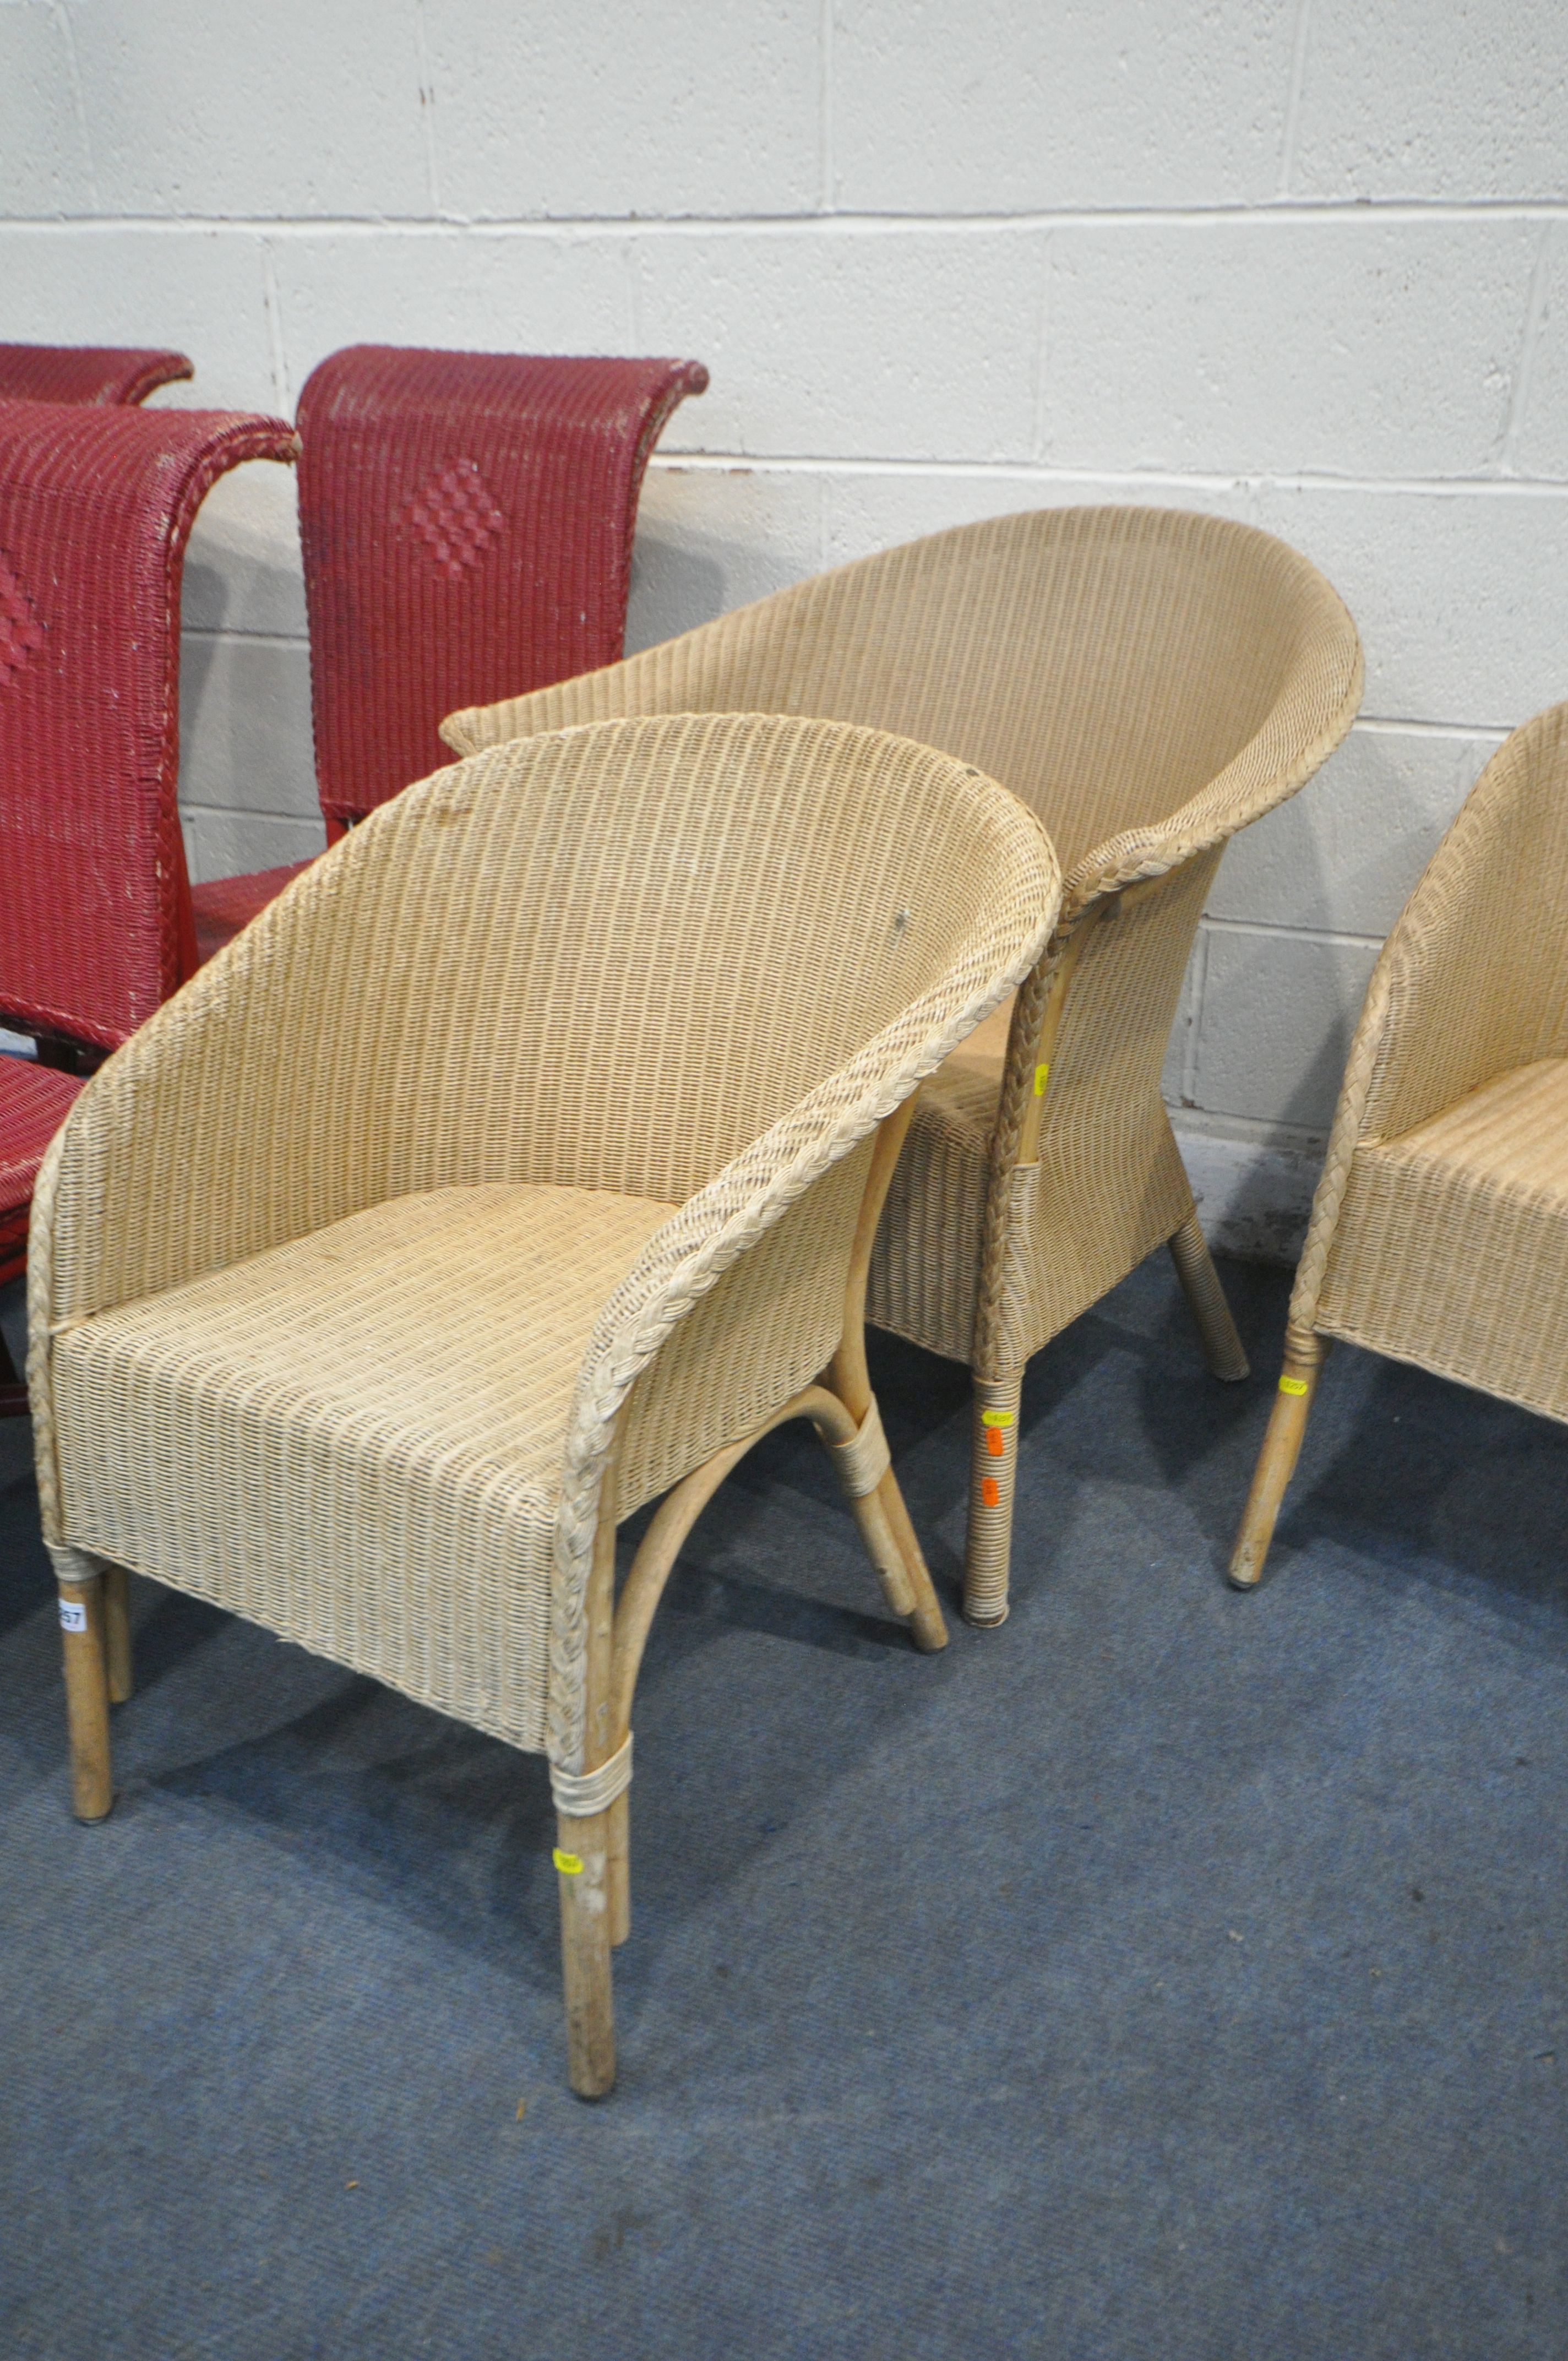 A LLOYD LOOM WICKER BASKET CHAIR, along with three cream Lloyd loom style chairs, and four red - Image 2 of 3